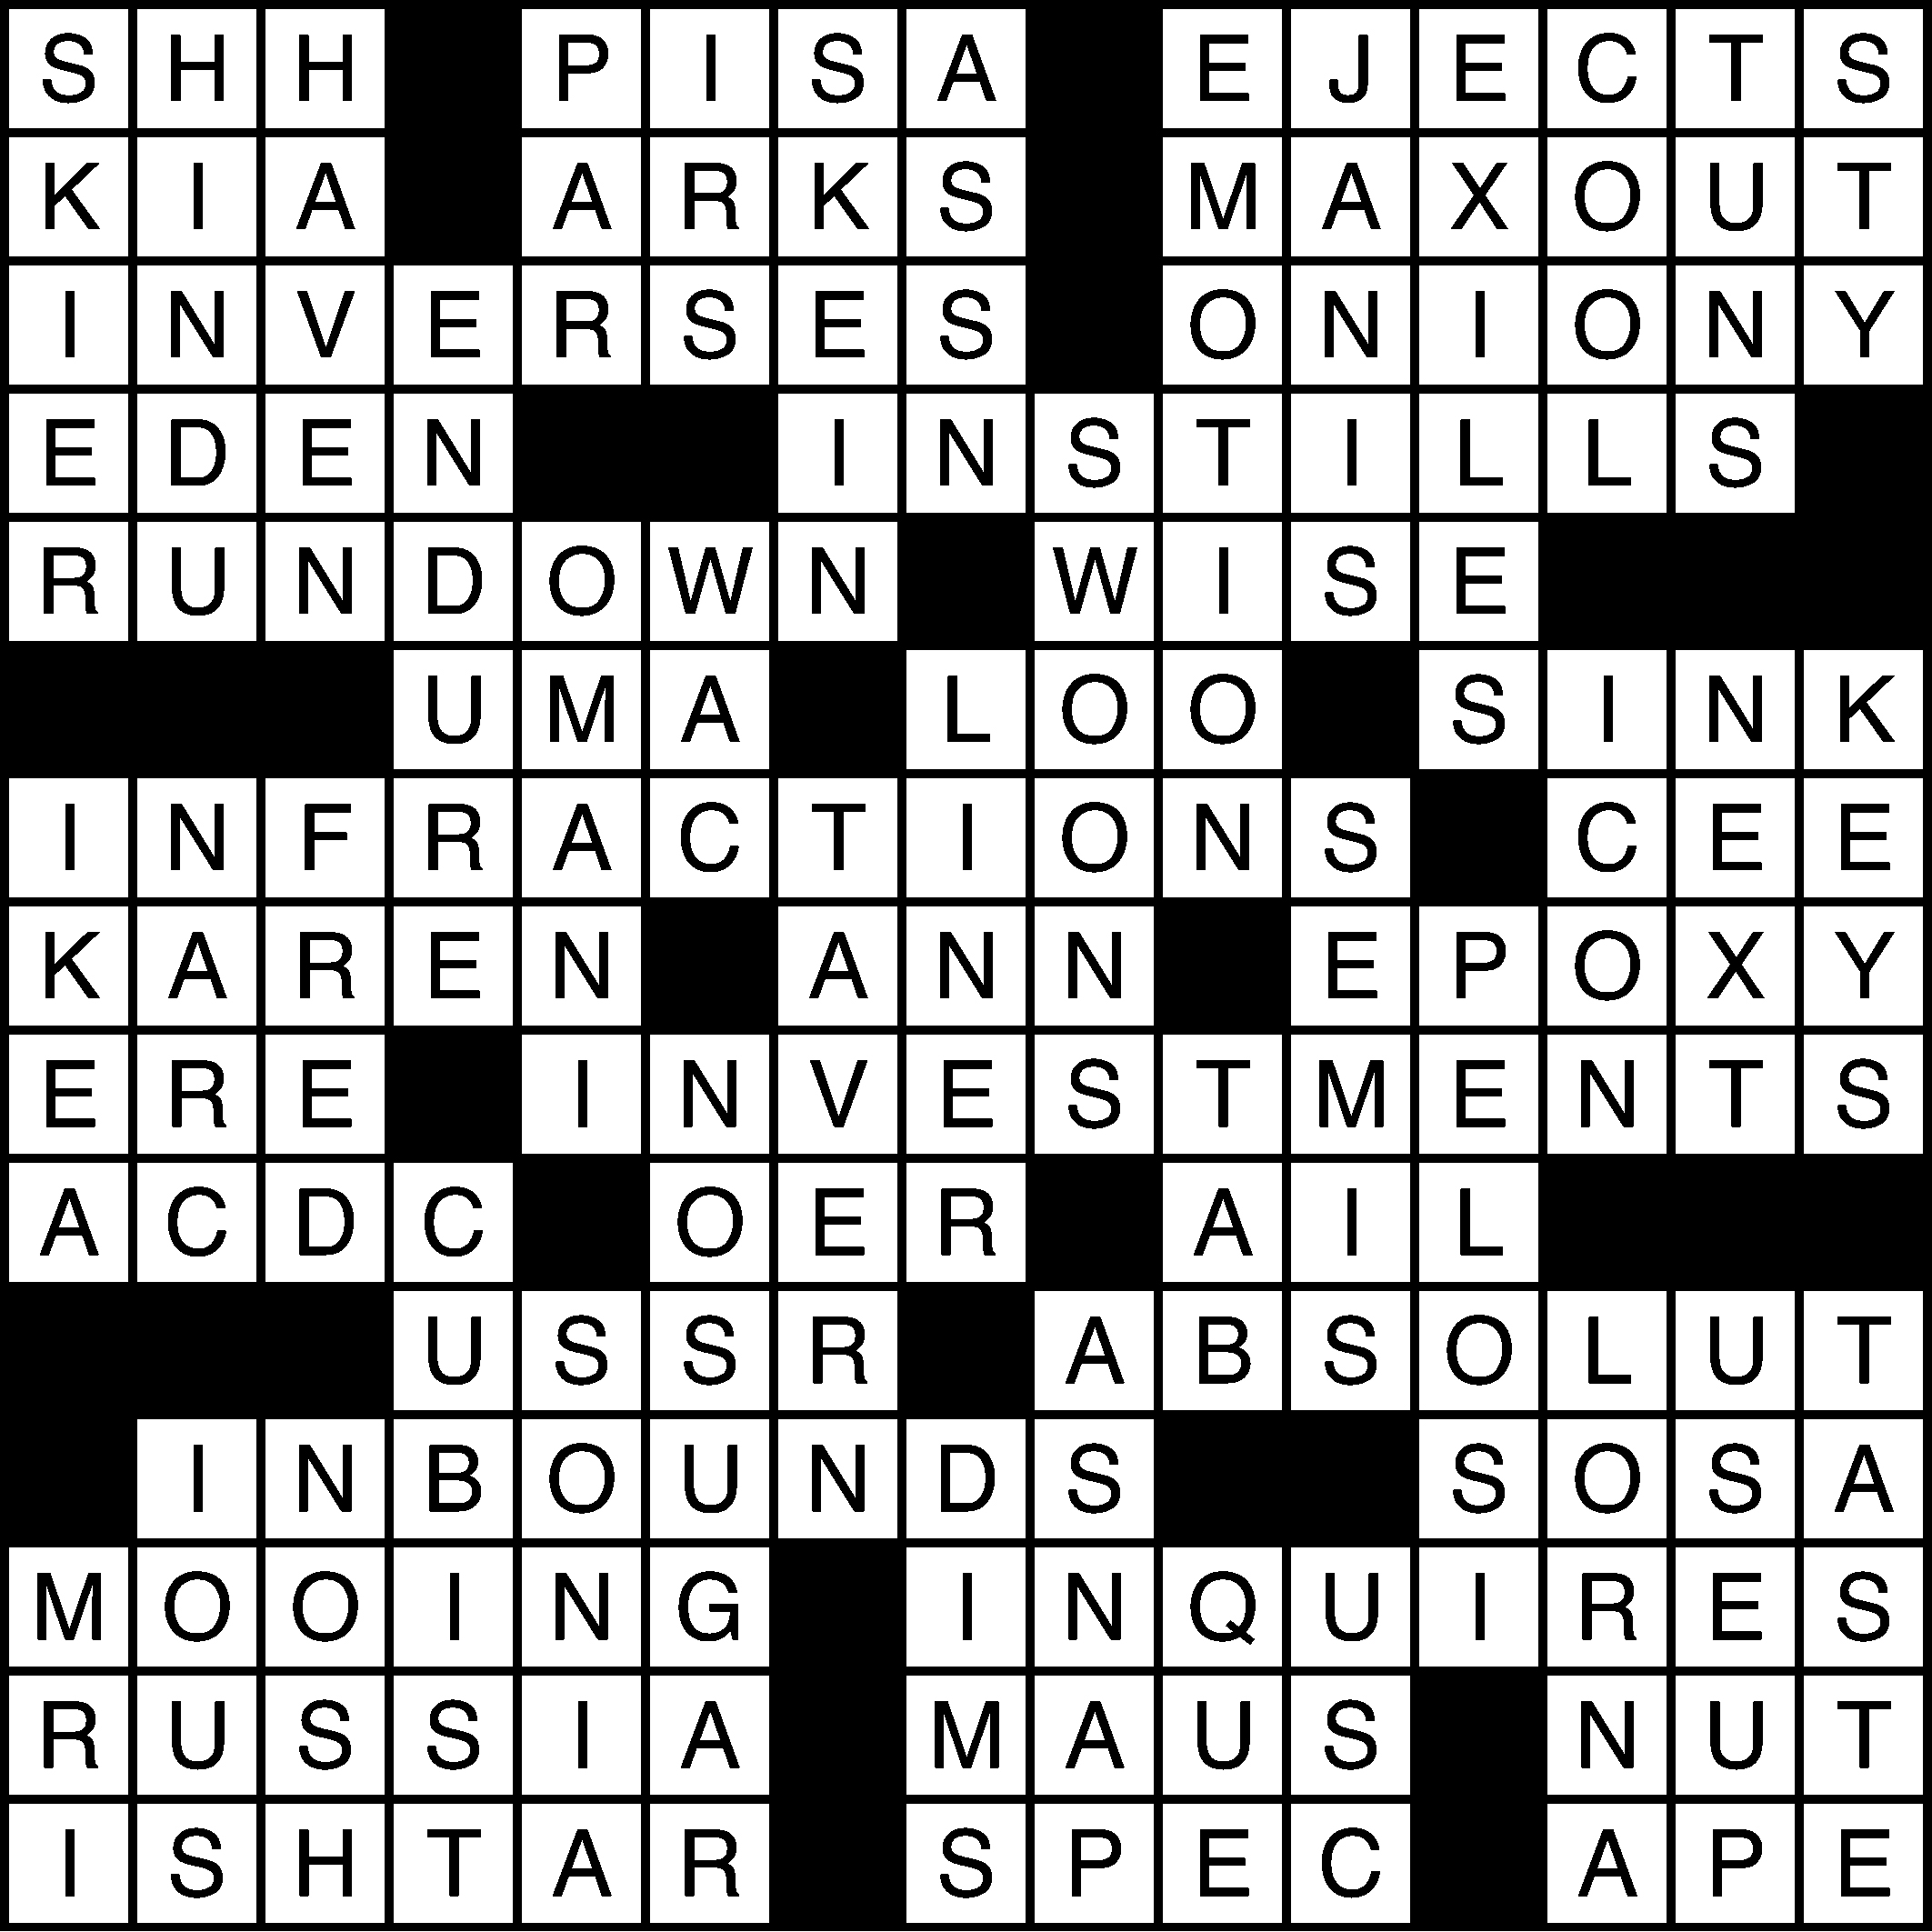 04/02/2014 Crossword: Answers The Baylor Lariat